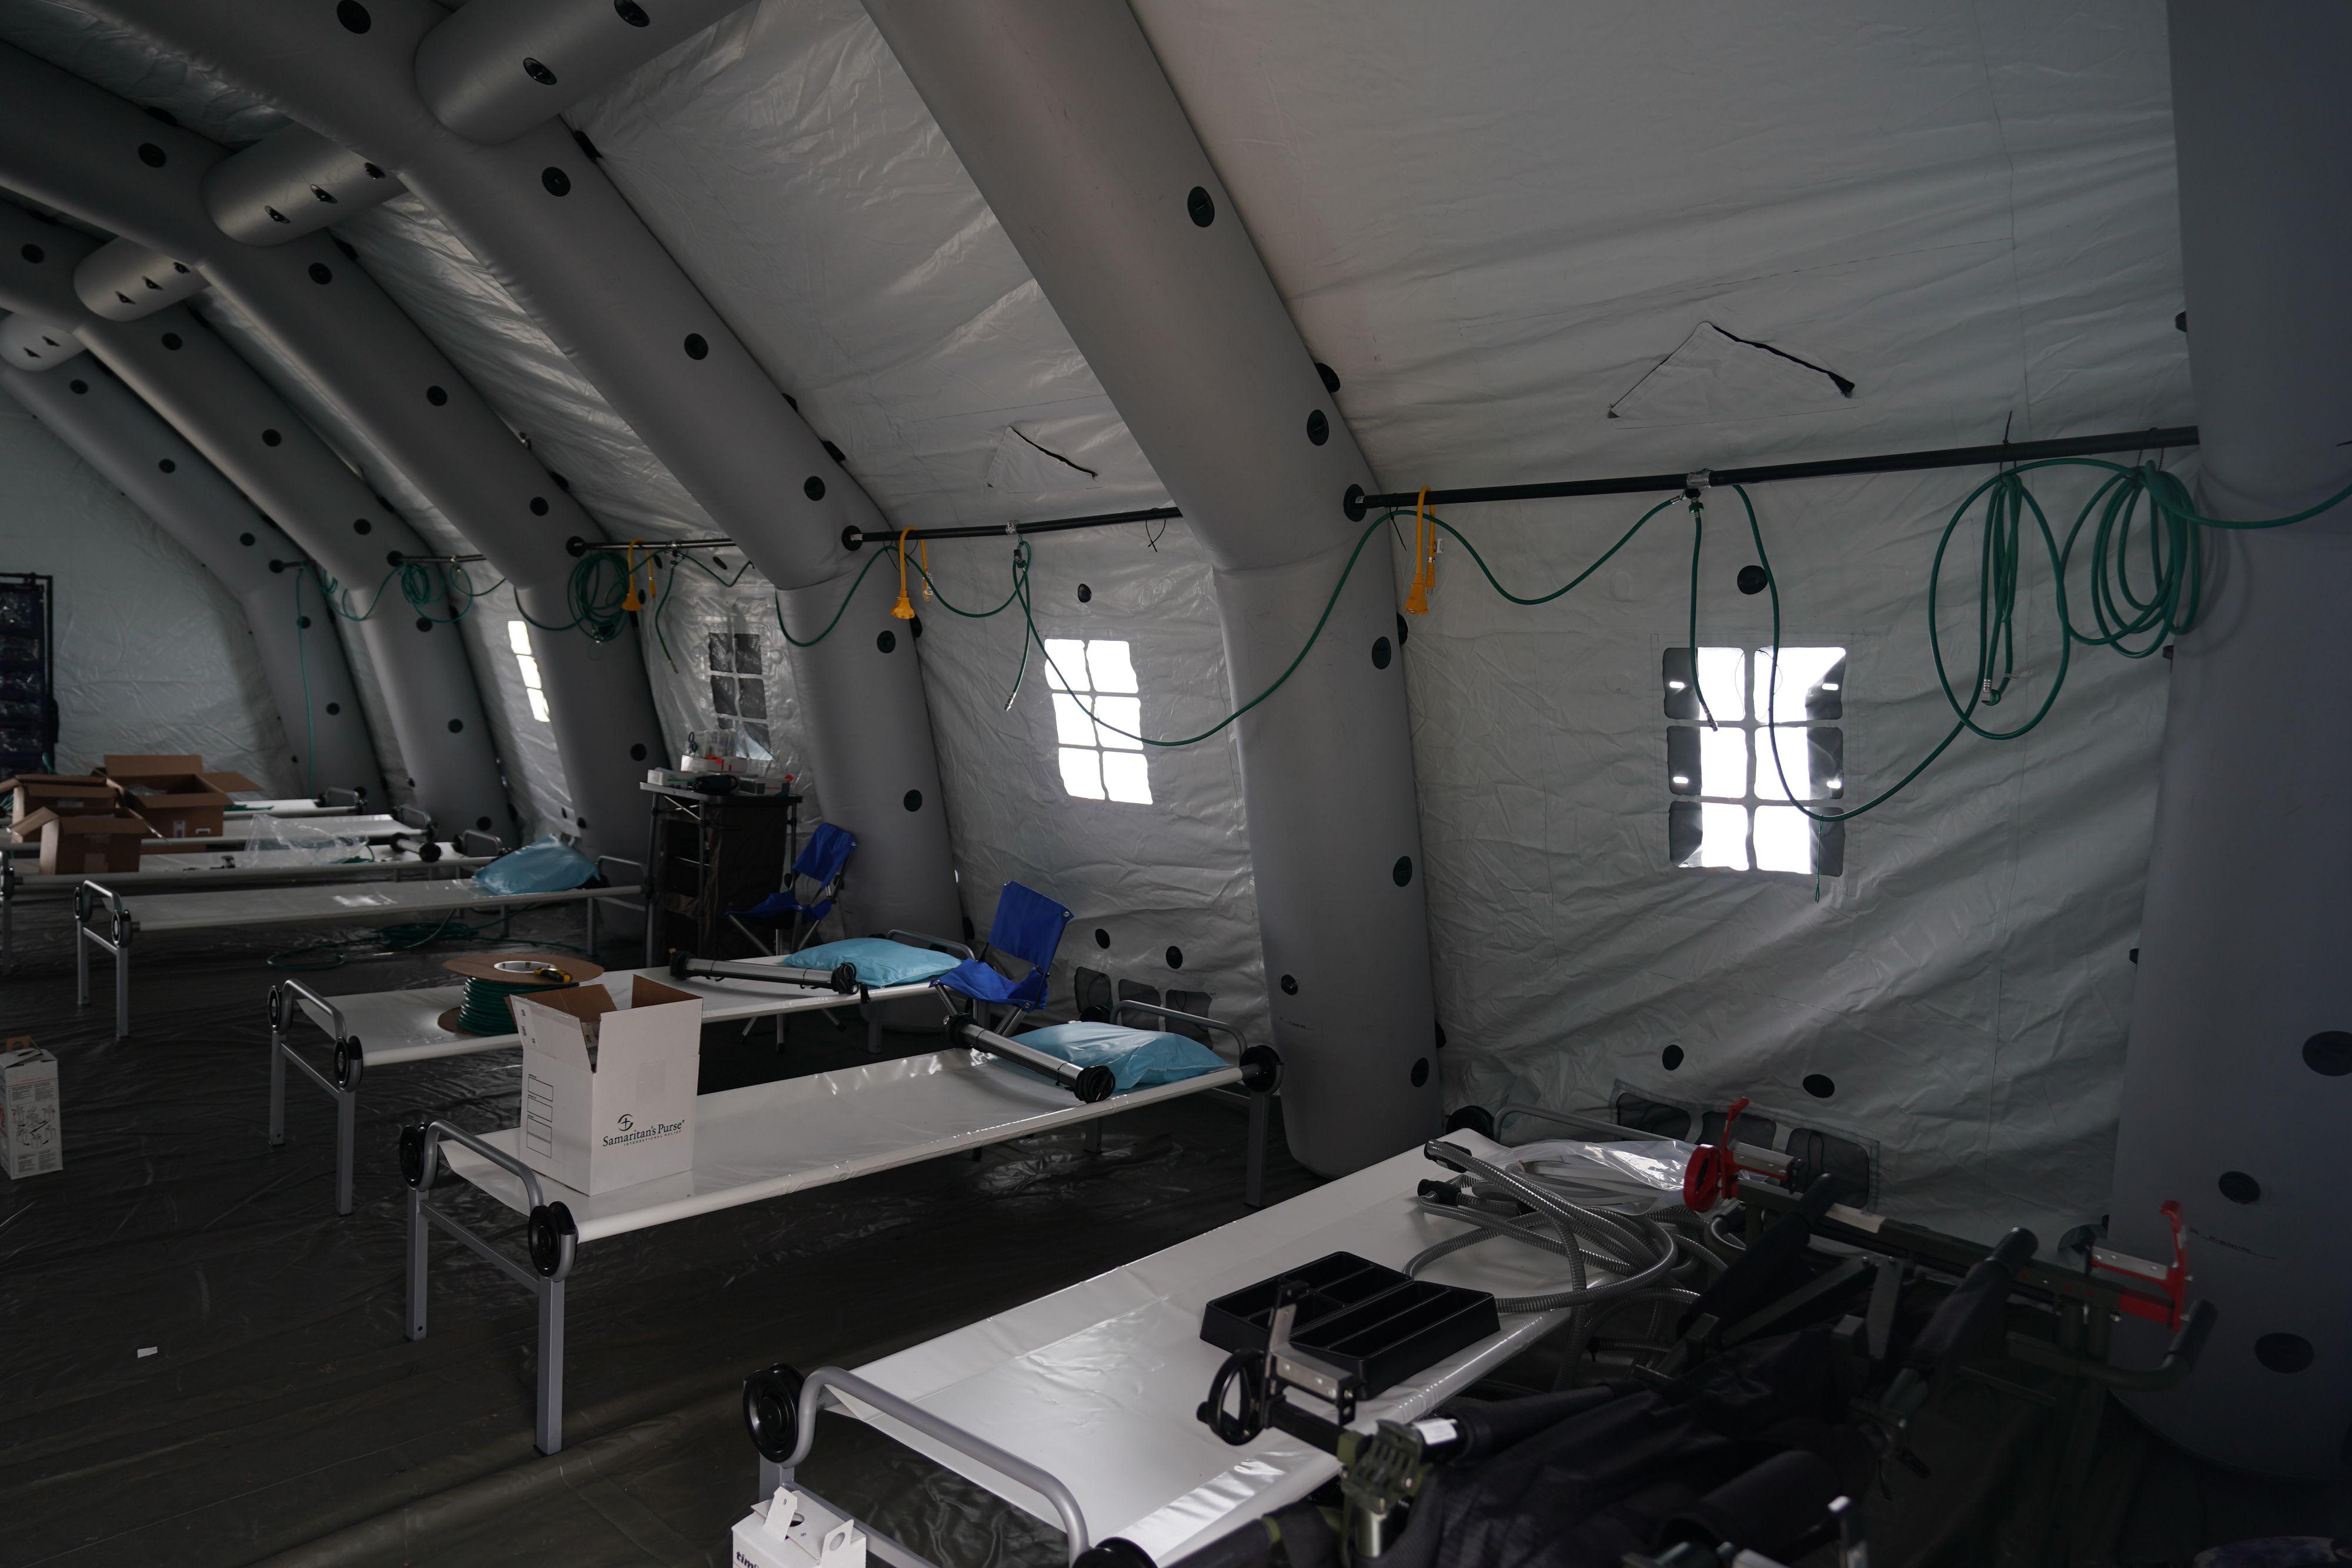 Beds are lined up in a tent as volunteers from the International Christian relief organization Samaritans Purse set up an Emergency Field Hospital for patients suffering from the coronavirus in March 2020.